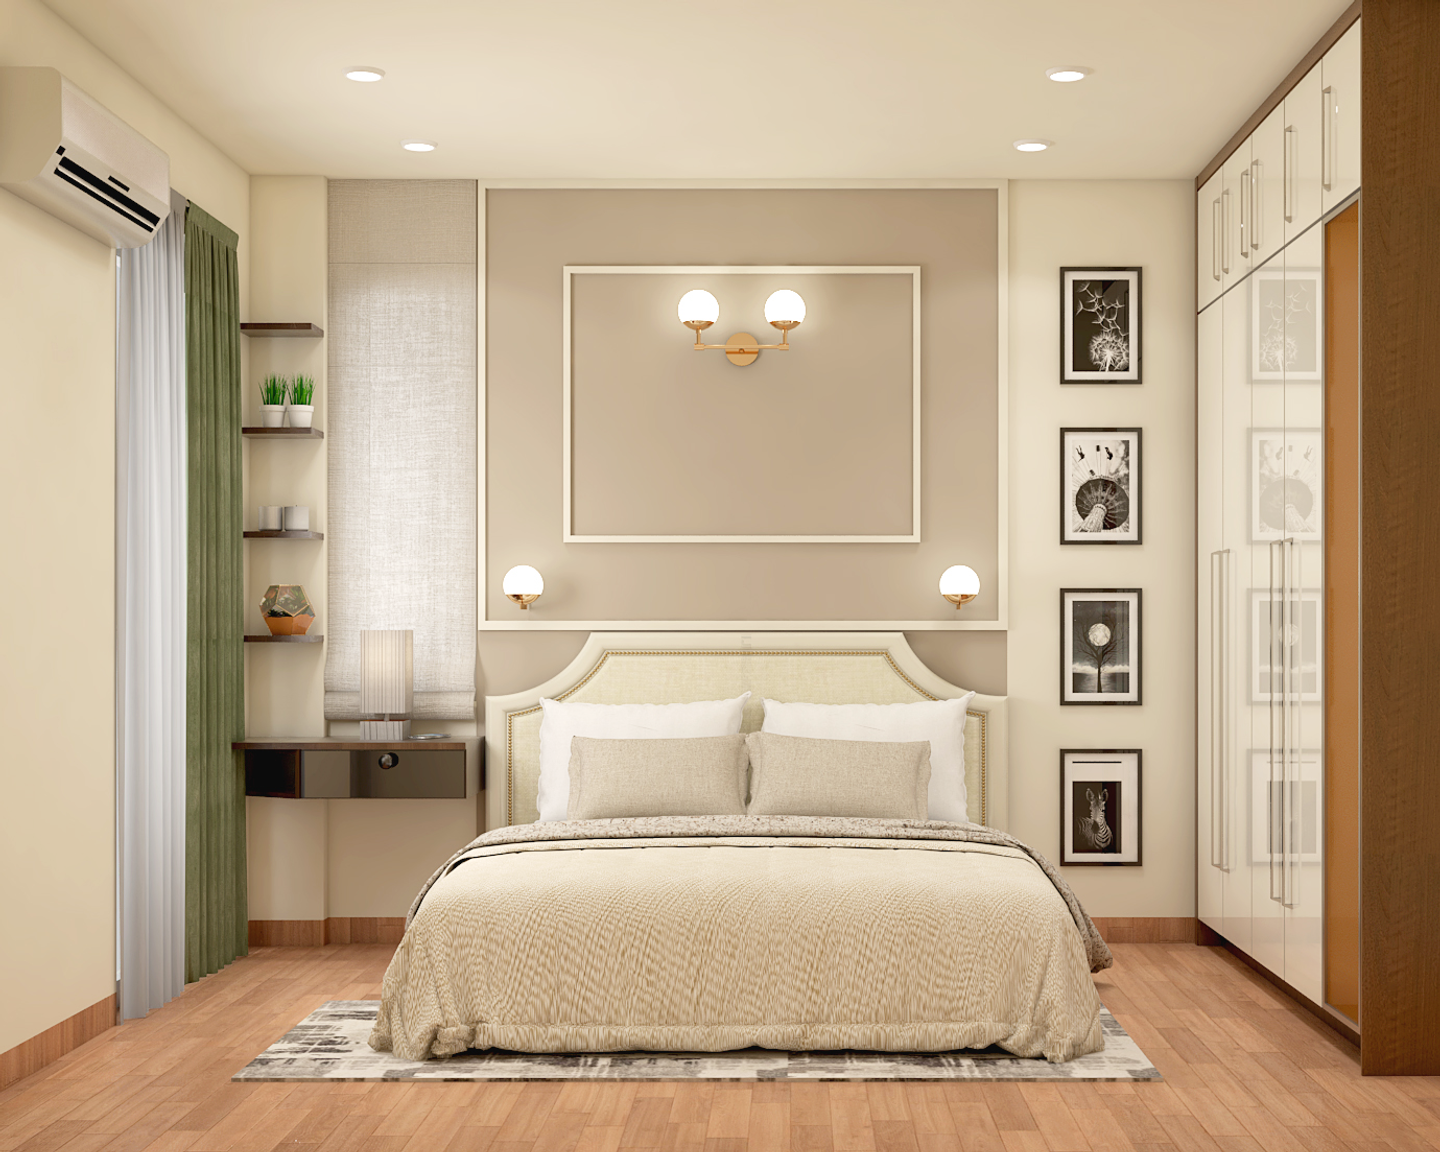 Beige-Coloured Classic Style Master Bedroom - Livspace